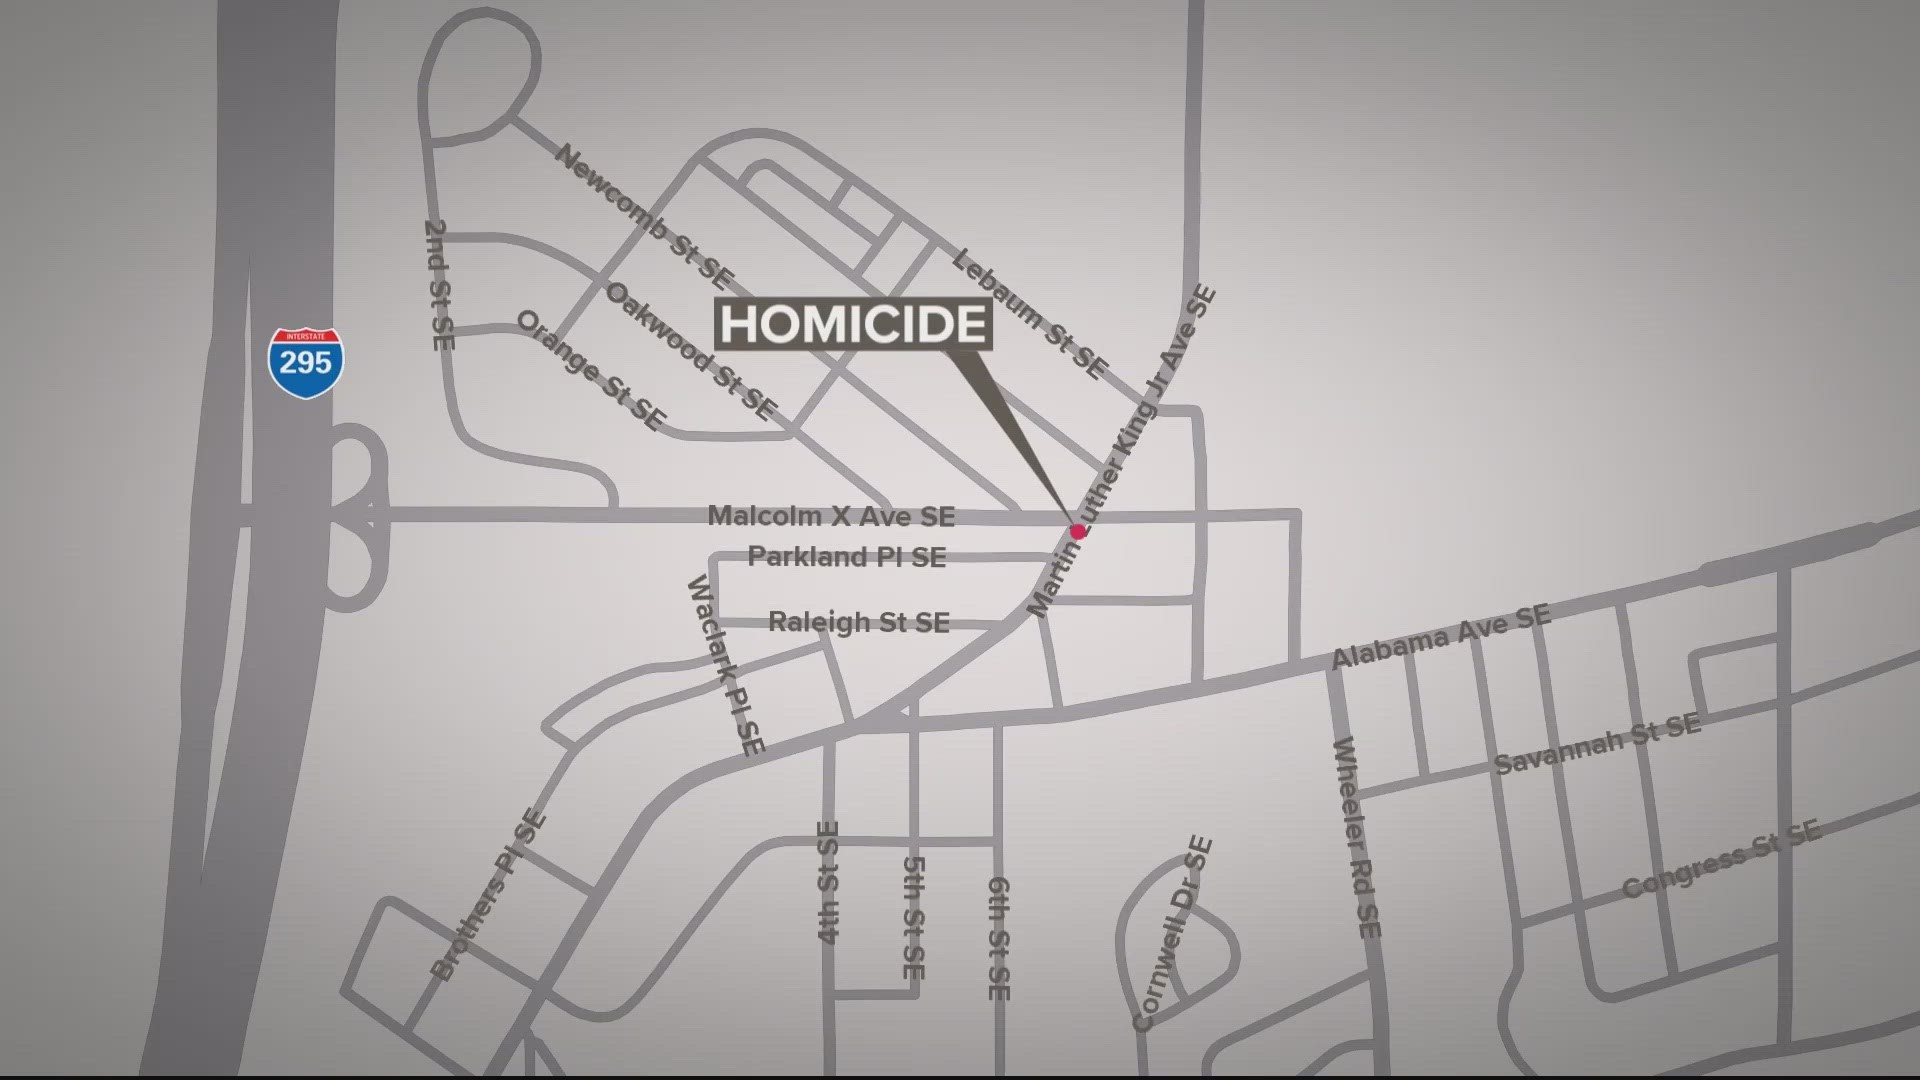 Detectives are working to develop a motive as well as possible suspects in the deadly shooting case.